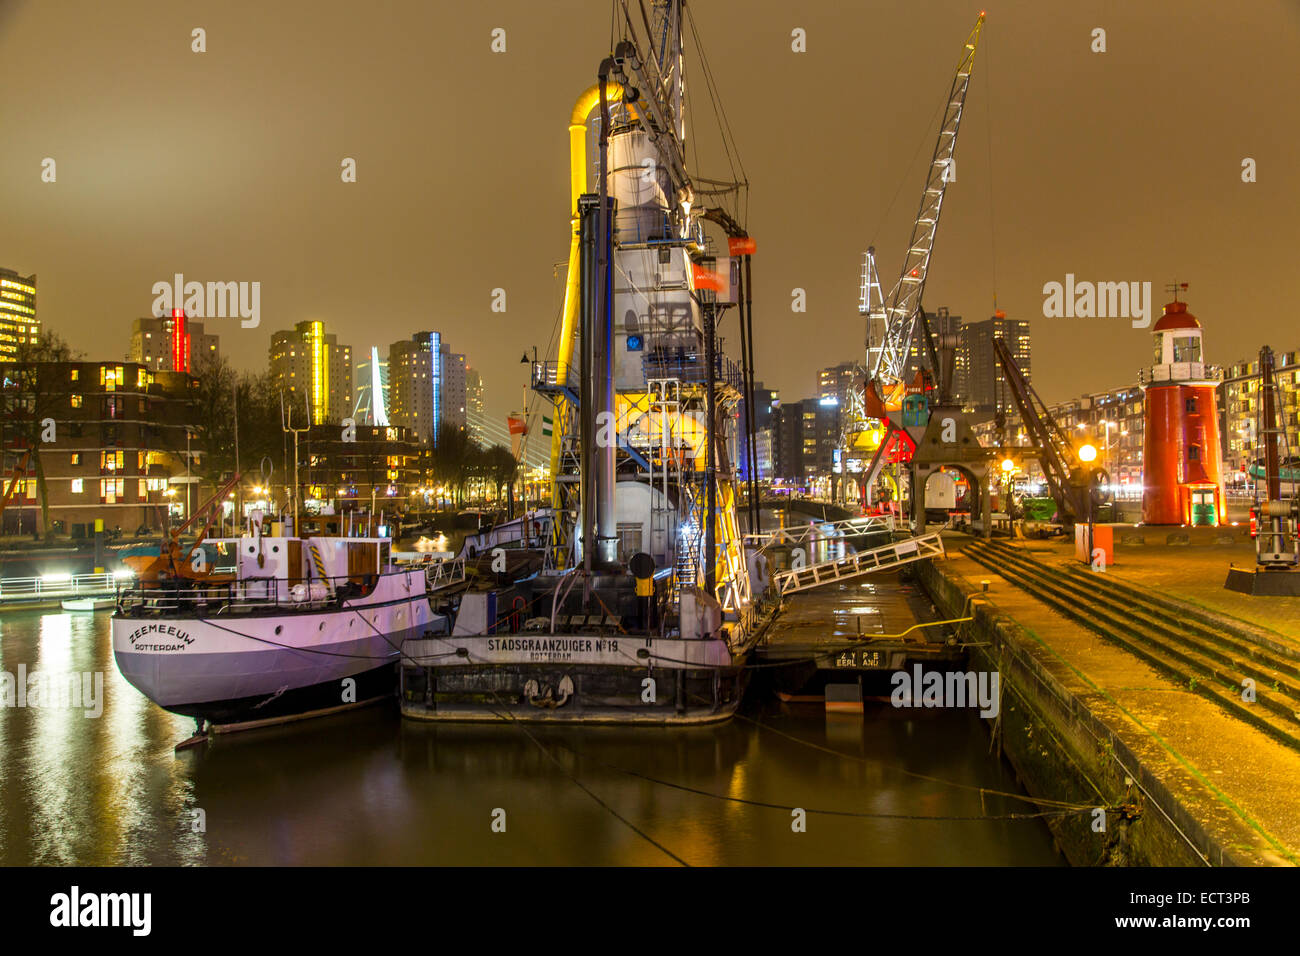 Leuvehaven, 'Have Museum', Maritime Museum, docks in the city, historical marine vessels, tools, cranes, lighthouse, Stock Photo